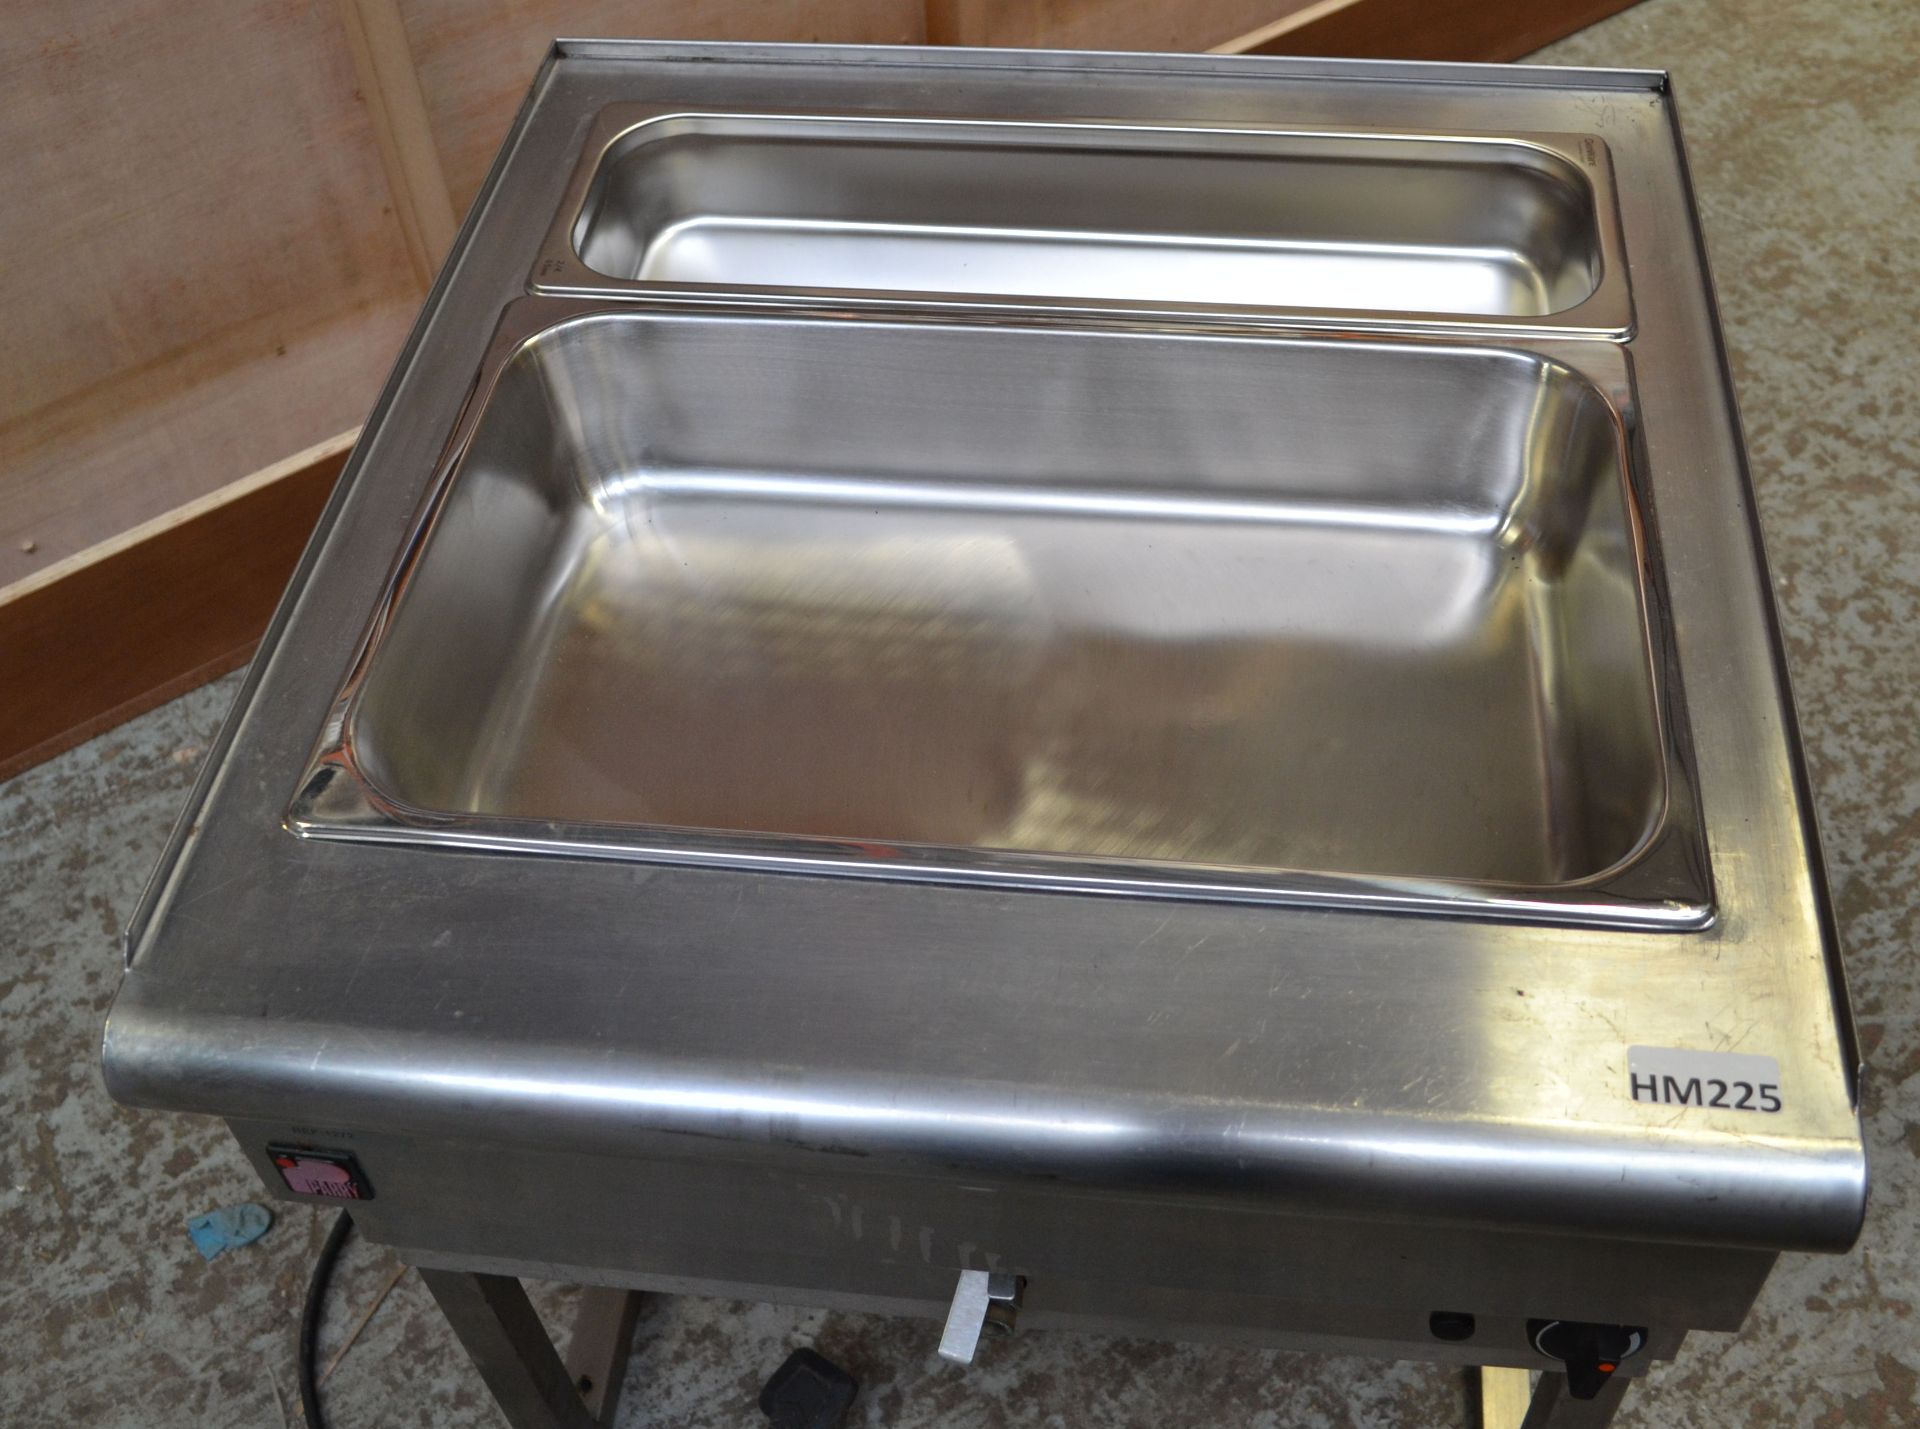 1 x Parry 9146.66W Electric Wet Bain Marie With Stand - 60.5 x 64 x 65.5(h) cm Inc. Stand - Ref: - Image 10 of 10